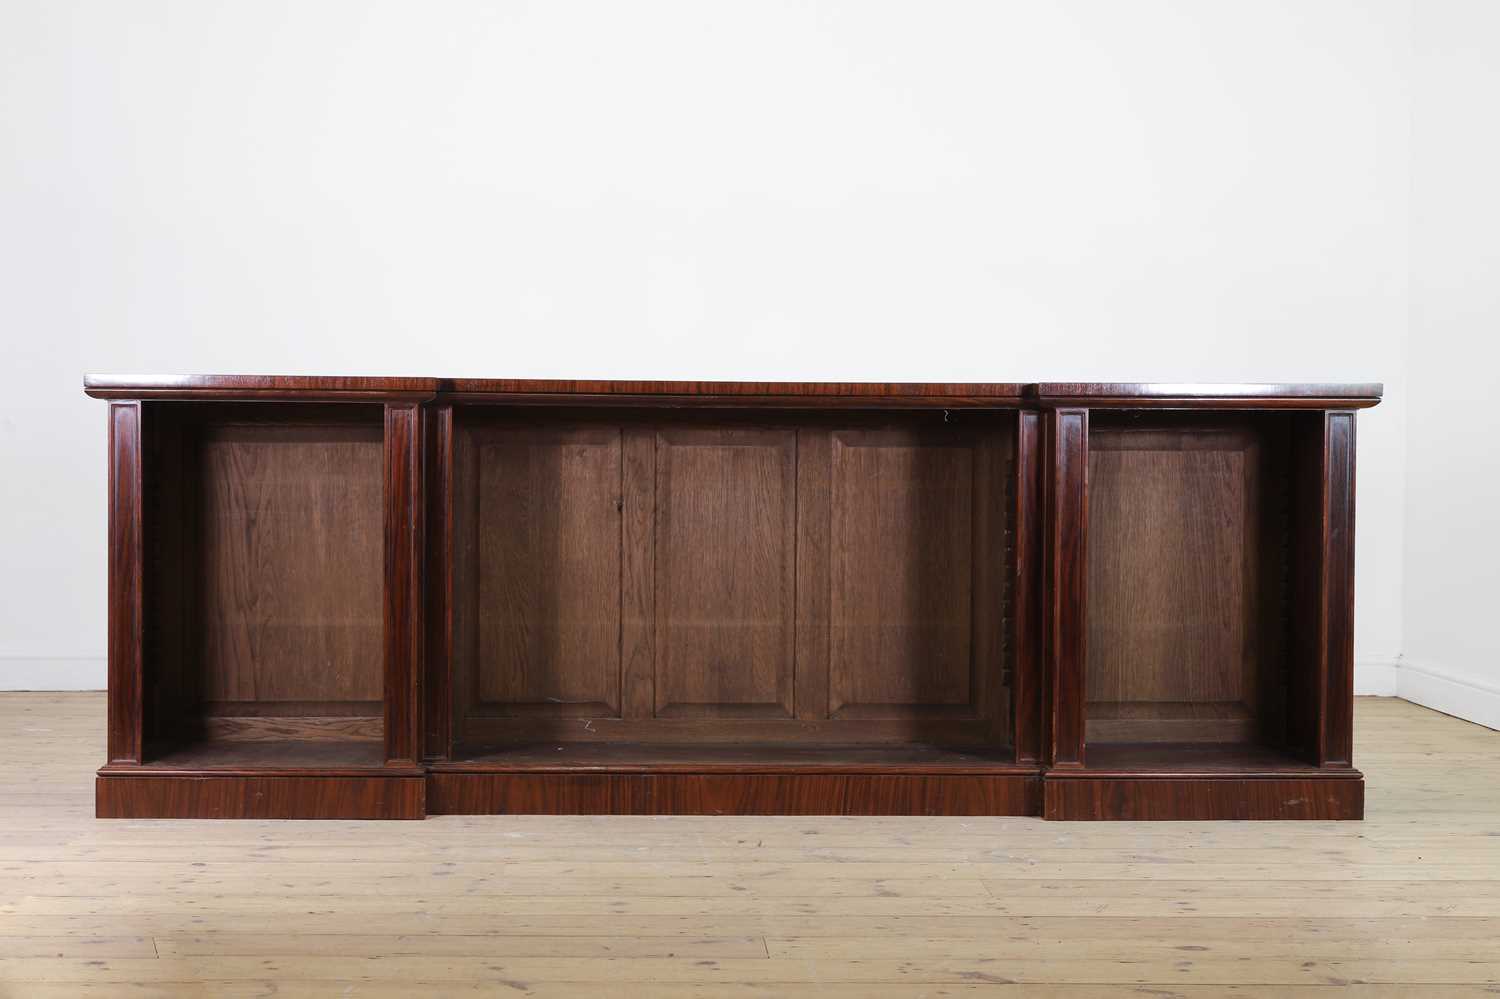 Lot 103 - A low bookcase by Rose Uniacke